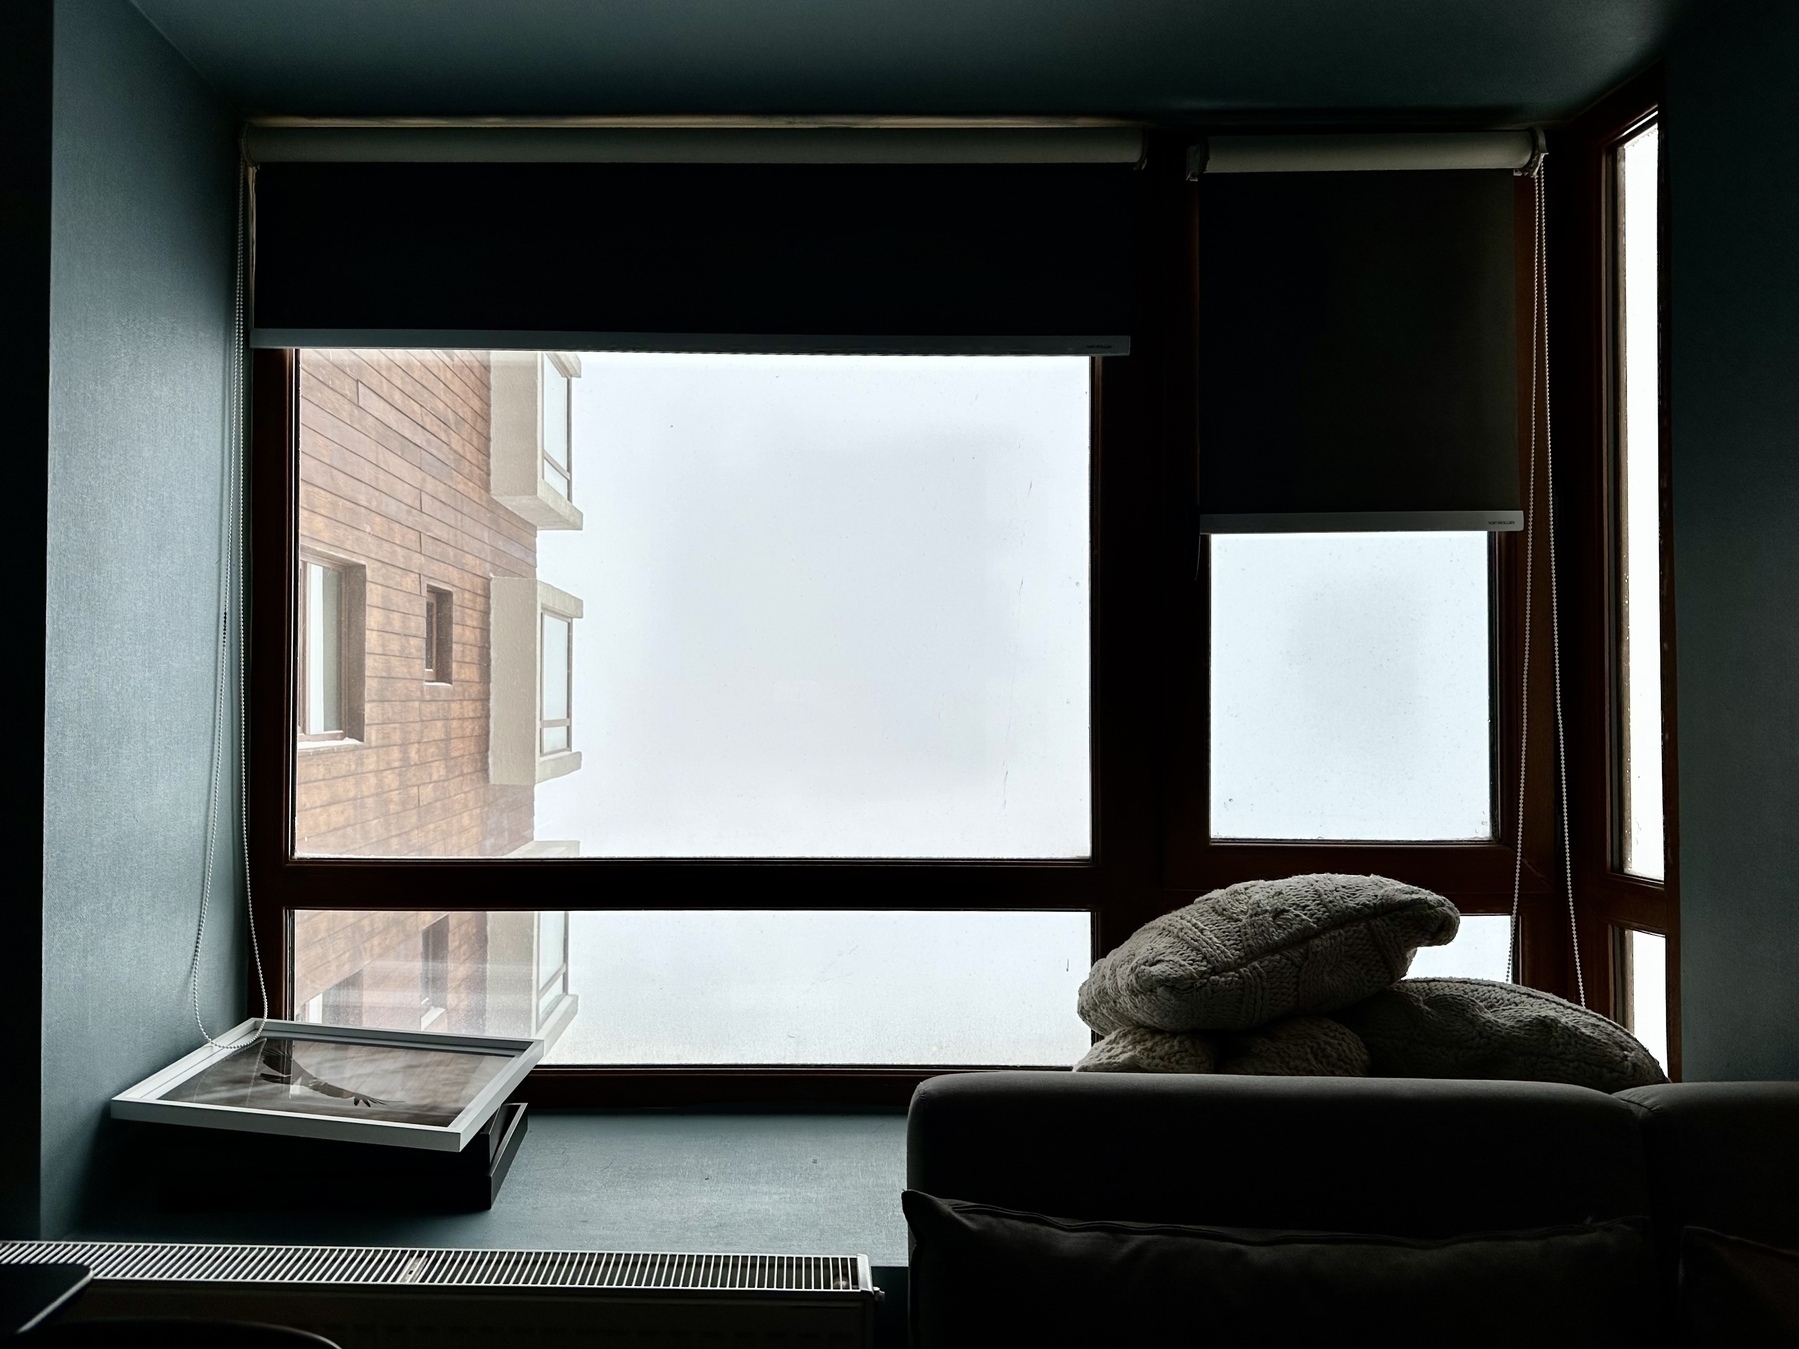 Picture of an apartment window looking out onto whiteout conditions due to snow.